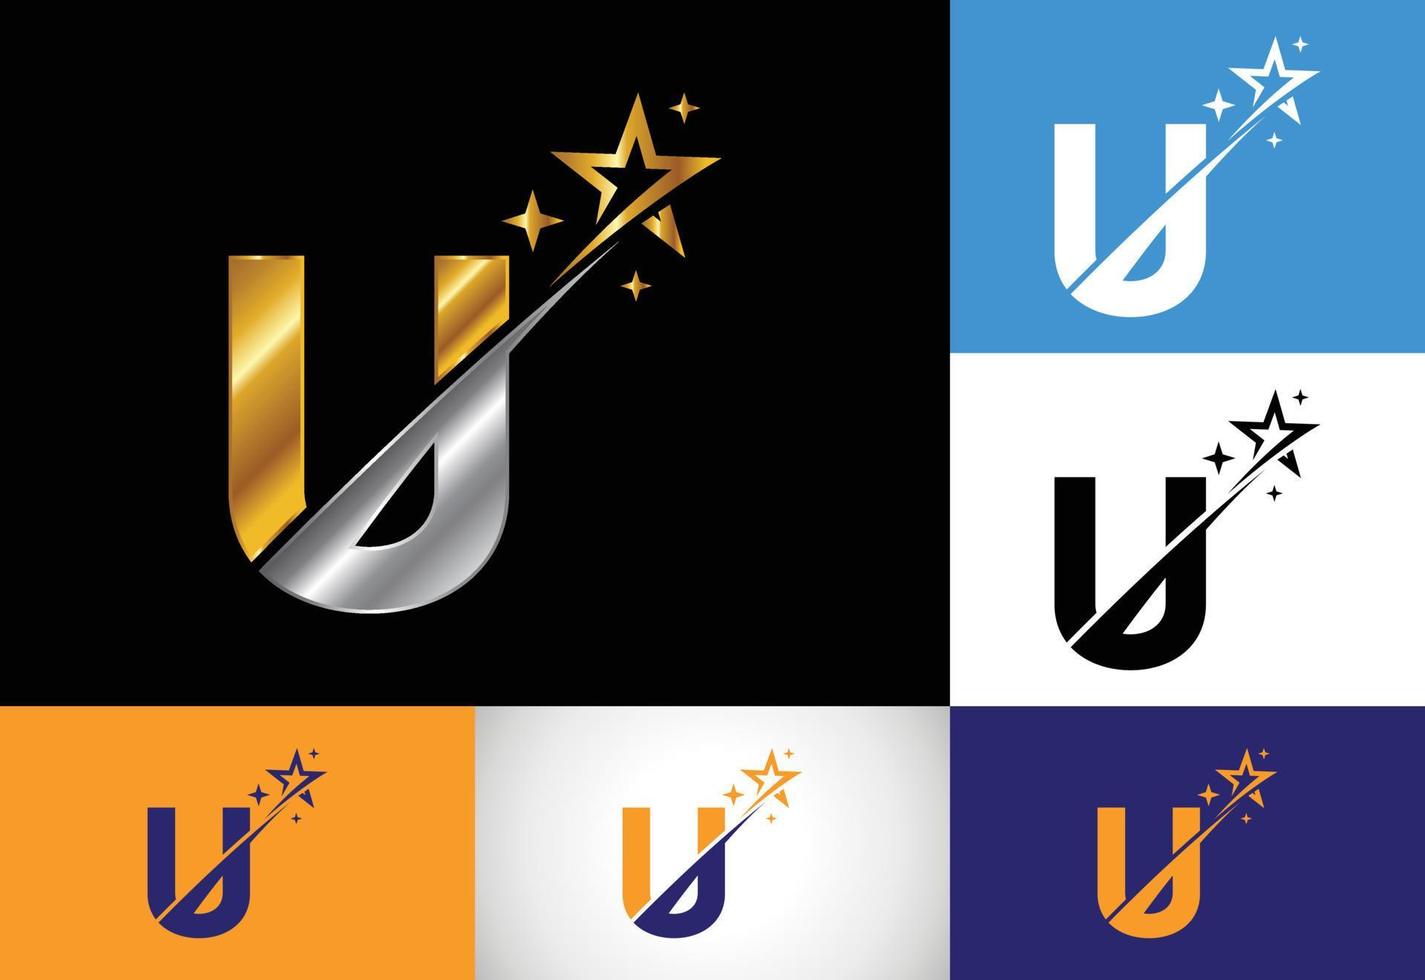 Initial U monogram letter alphabet with swoosh and star logo icon. Abstract star logo sign symbol design. Modern vector logo for business and company identity.